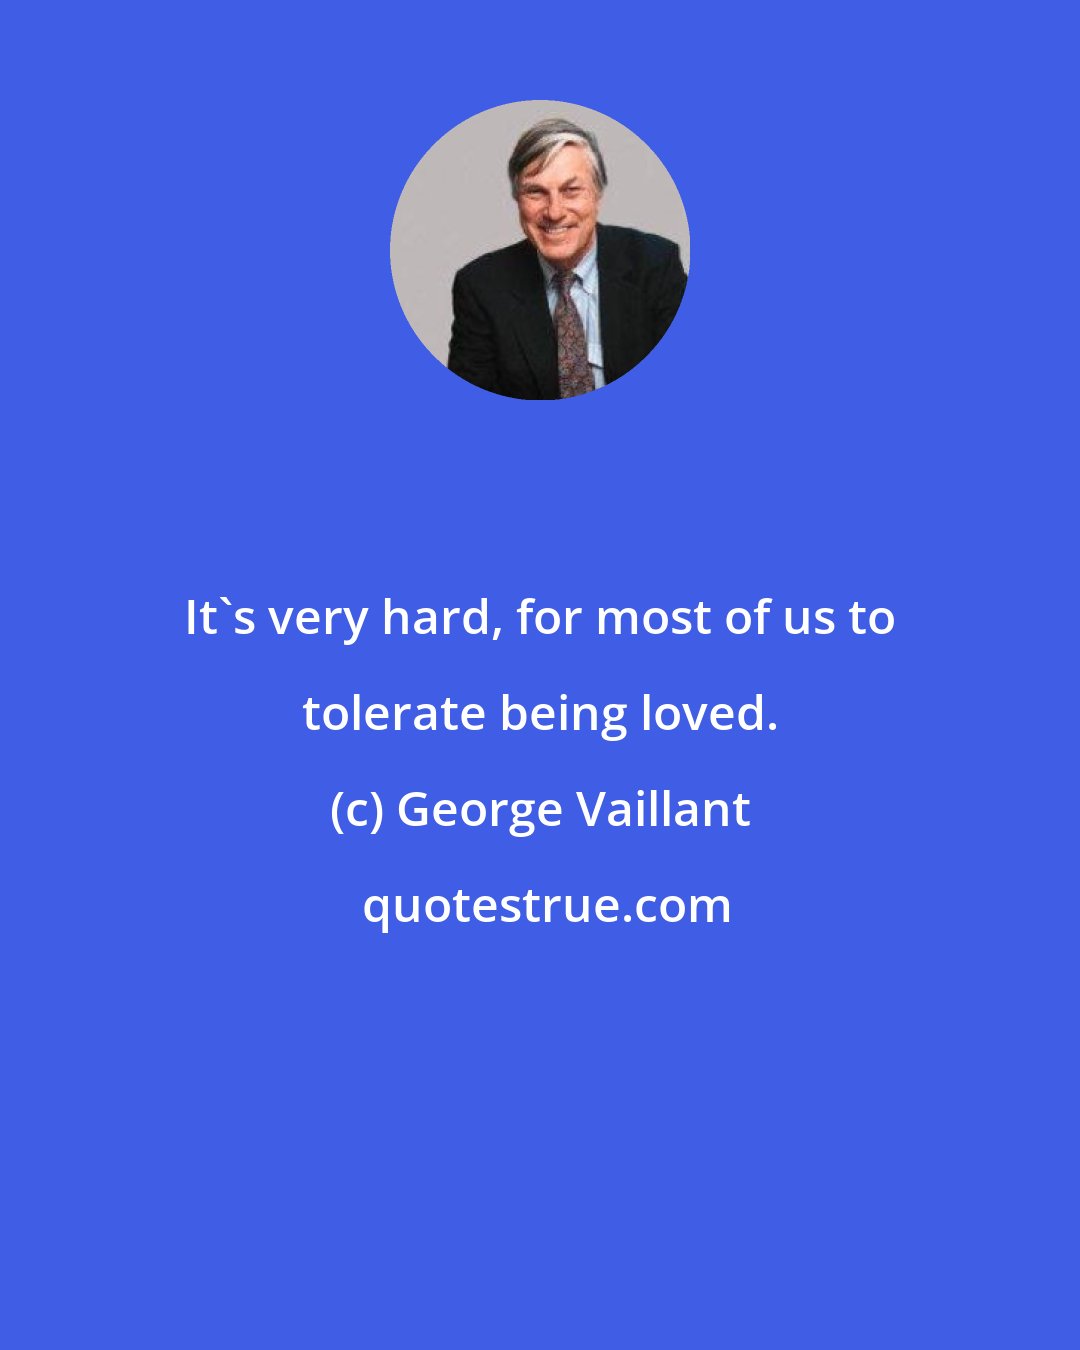 George Vaillant: It's very hard, for most of us to tolerate being loved.